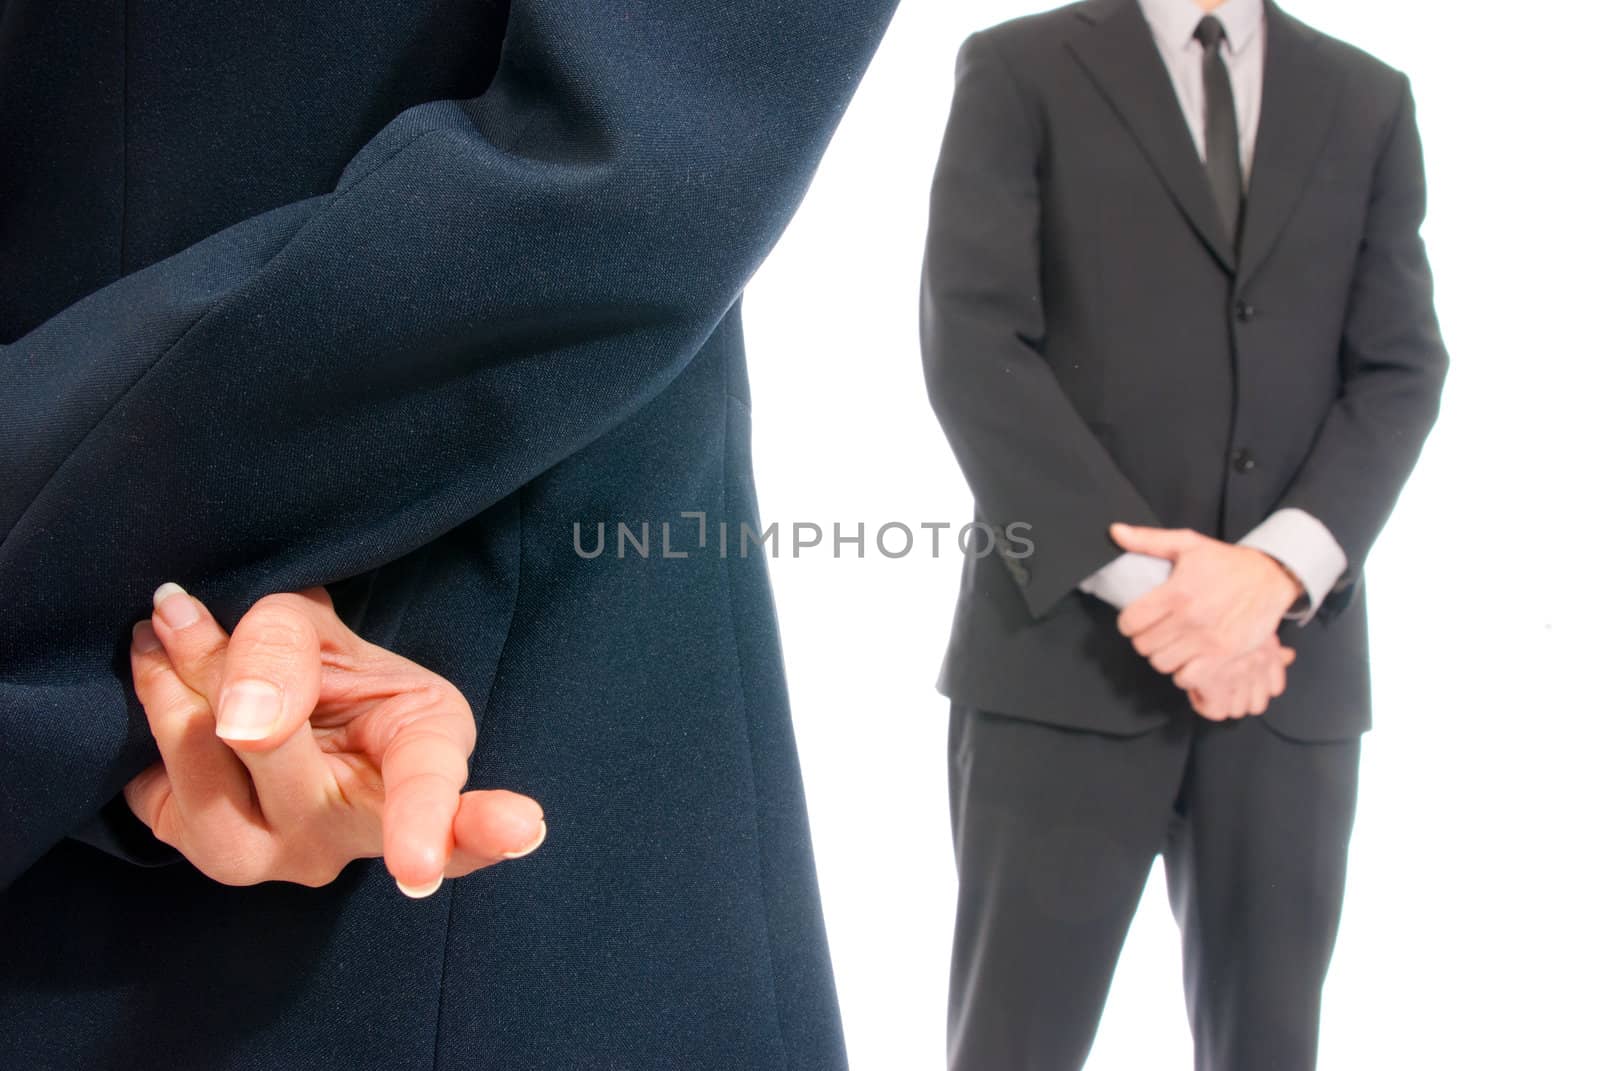 Business concept fingers crossed in front of boss isolated on white background